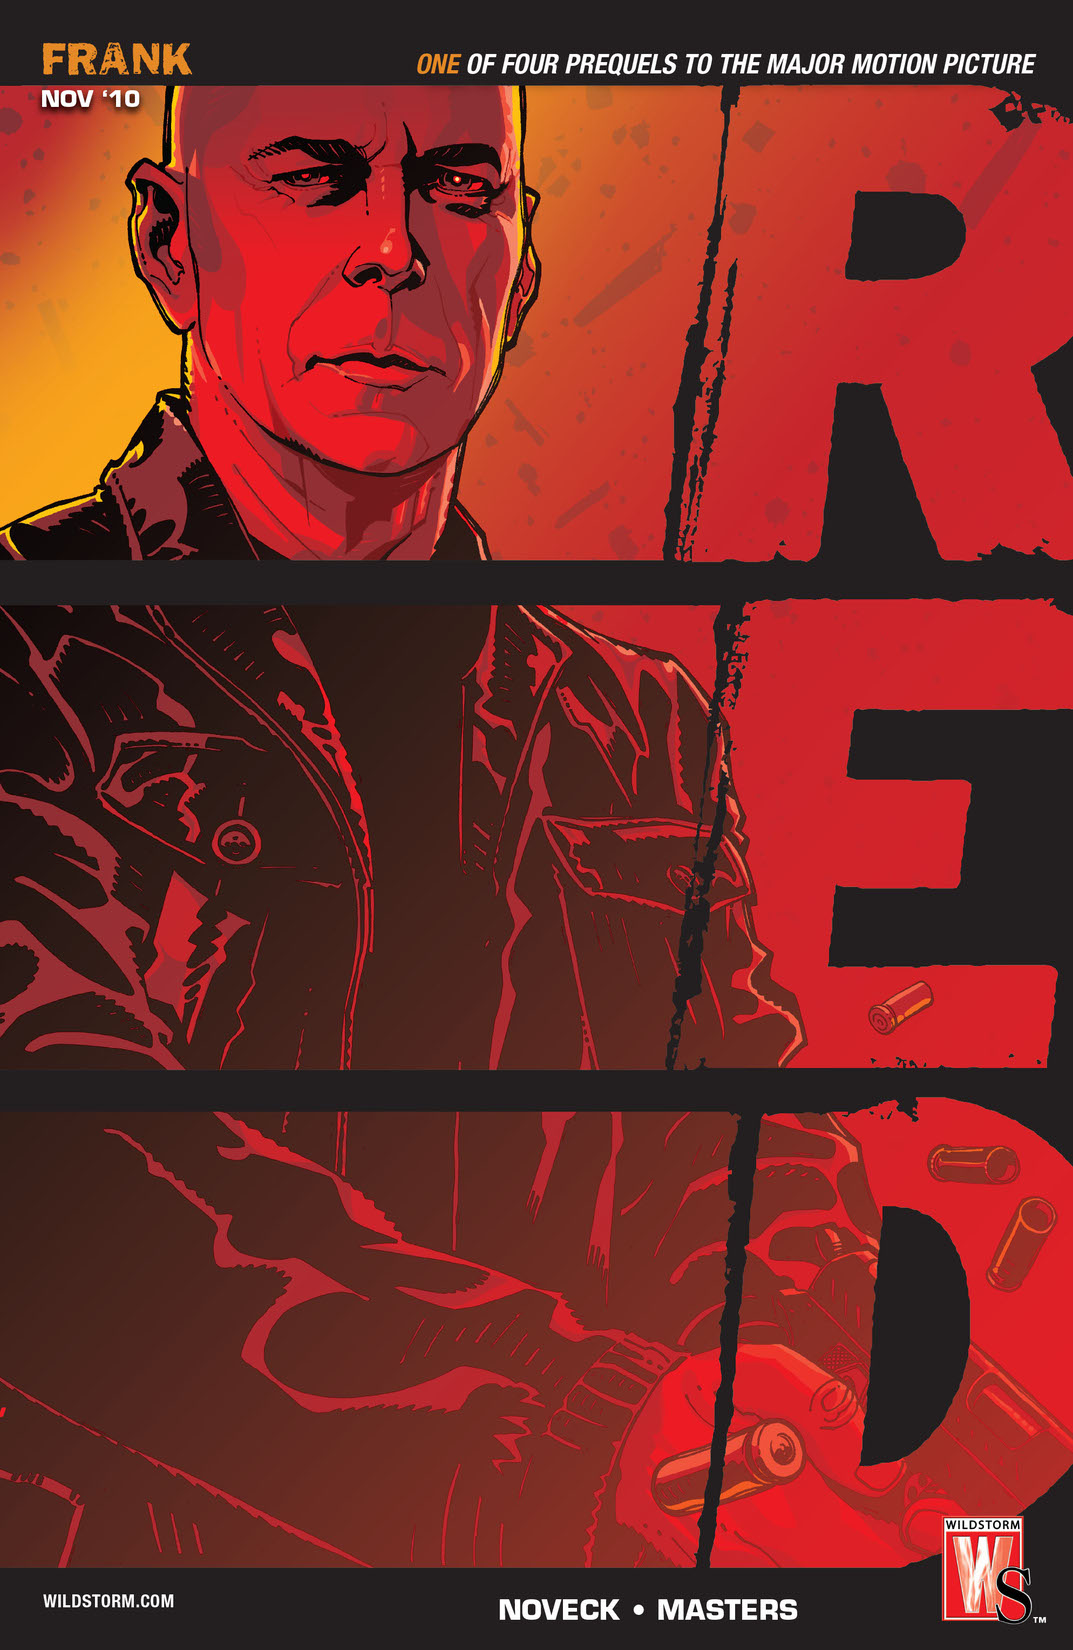 Red: Frank Special #1 #1 preview images